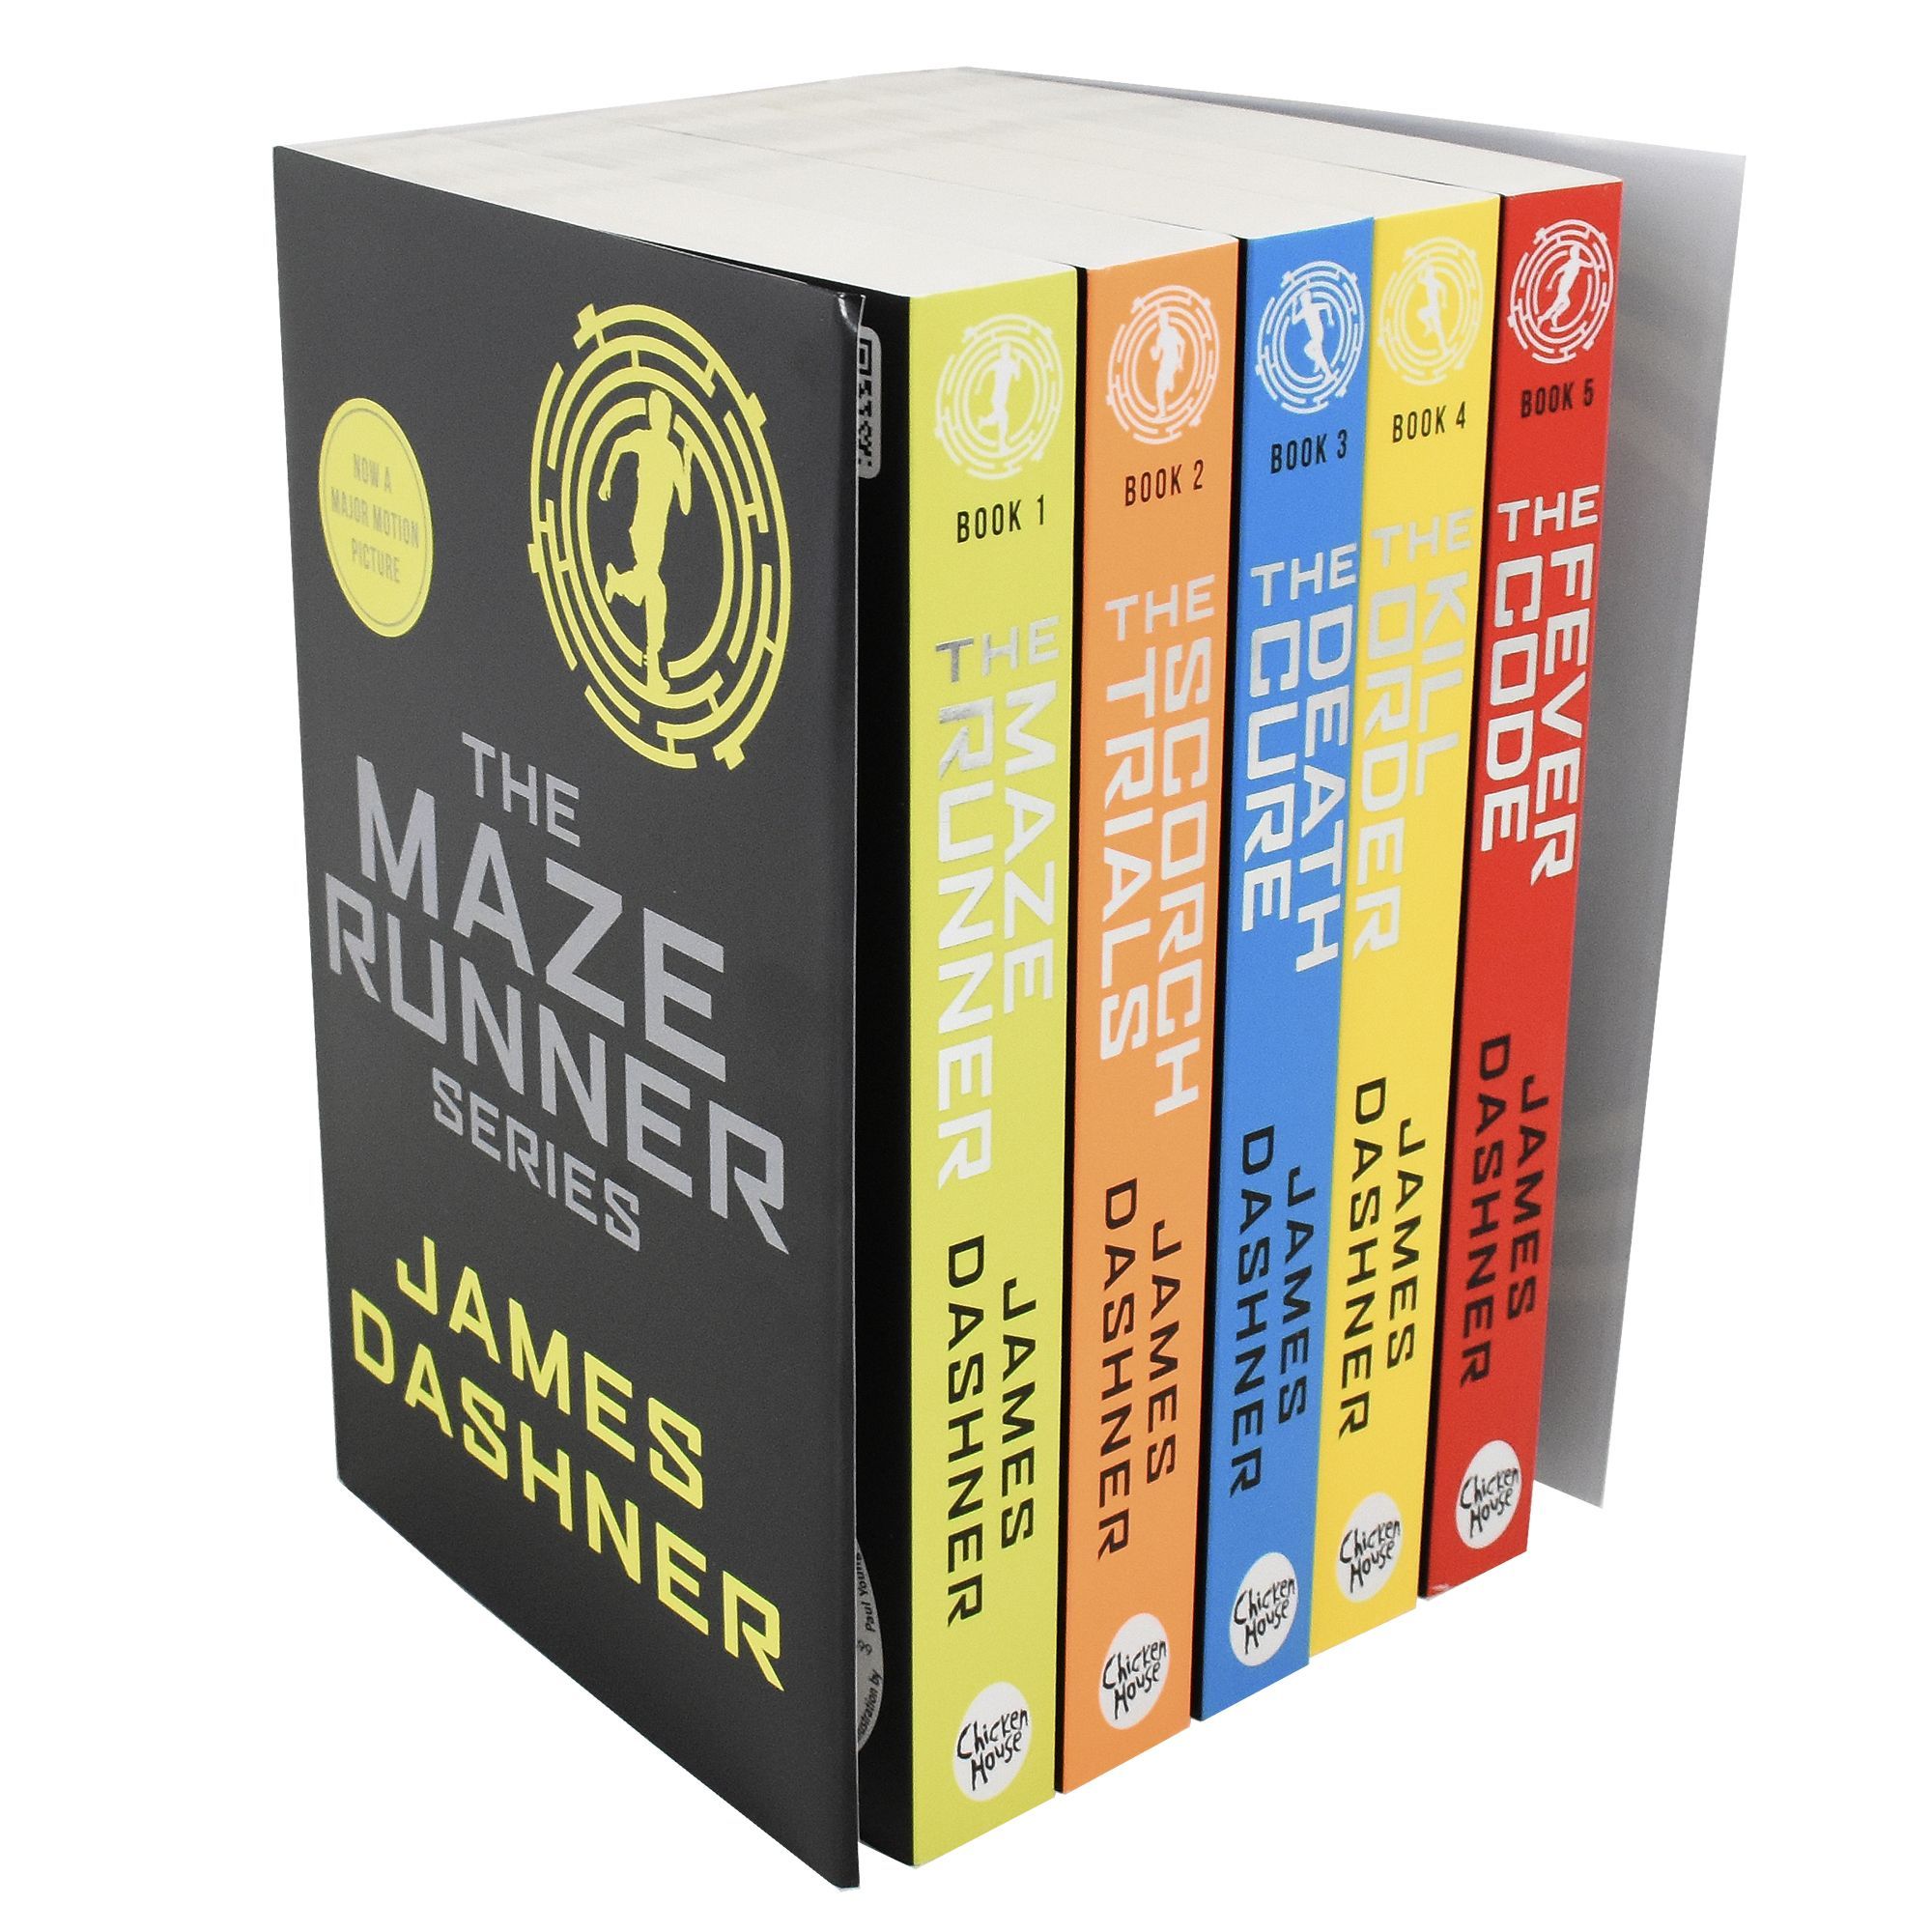 The Maze Runner Series: The Maze Runner Series Complete Collection